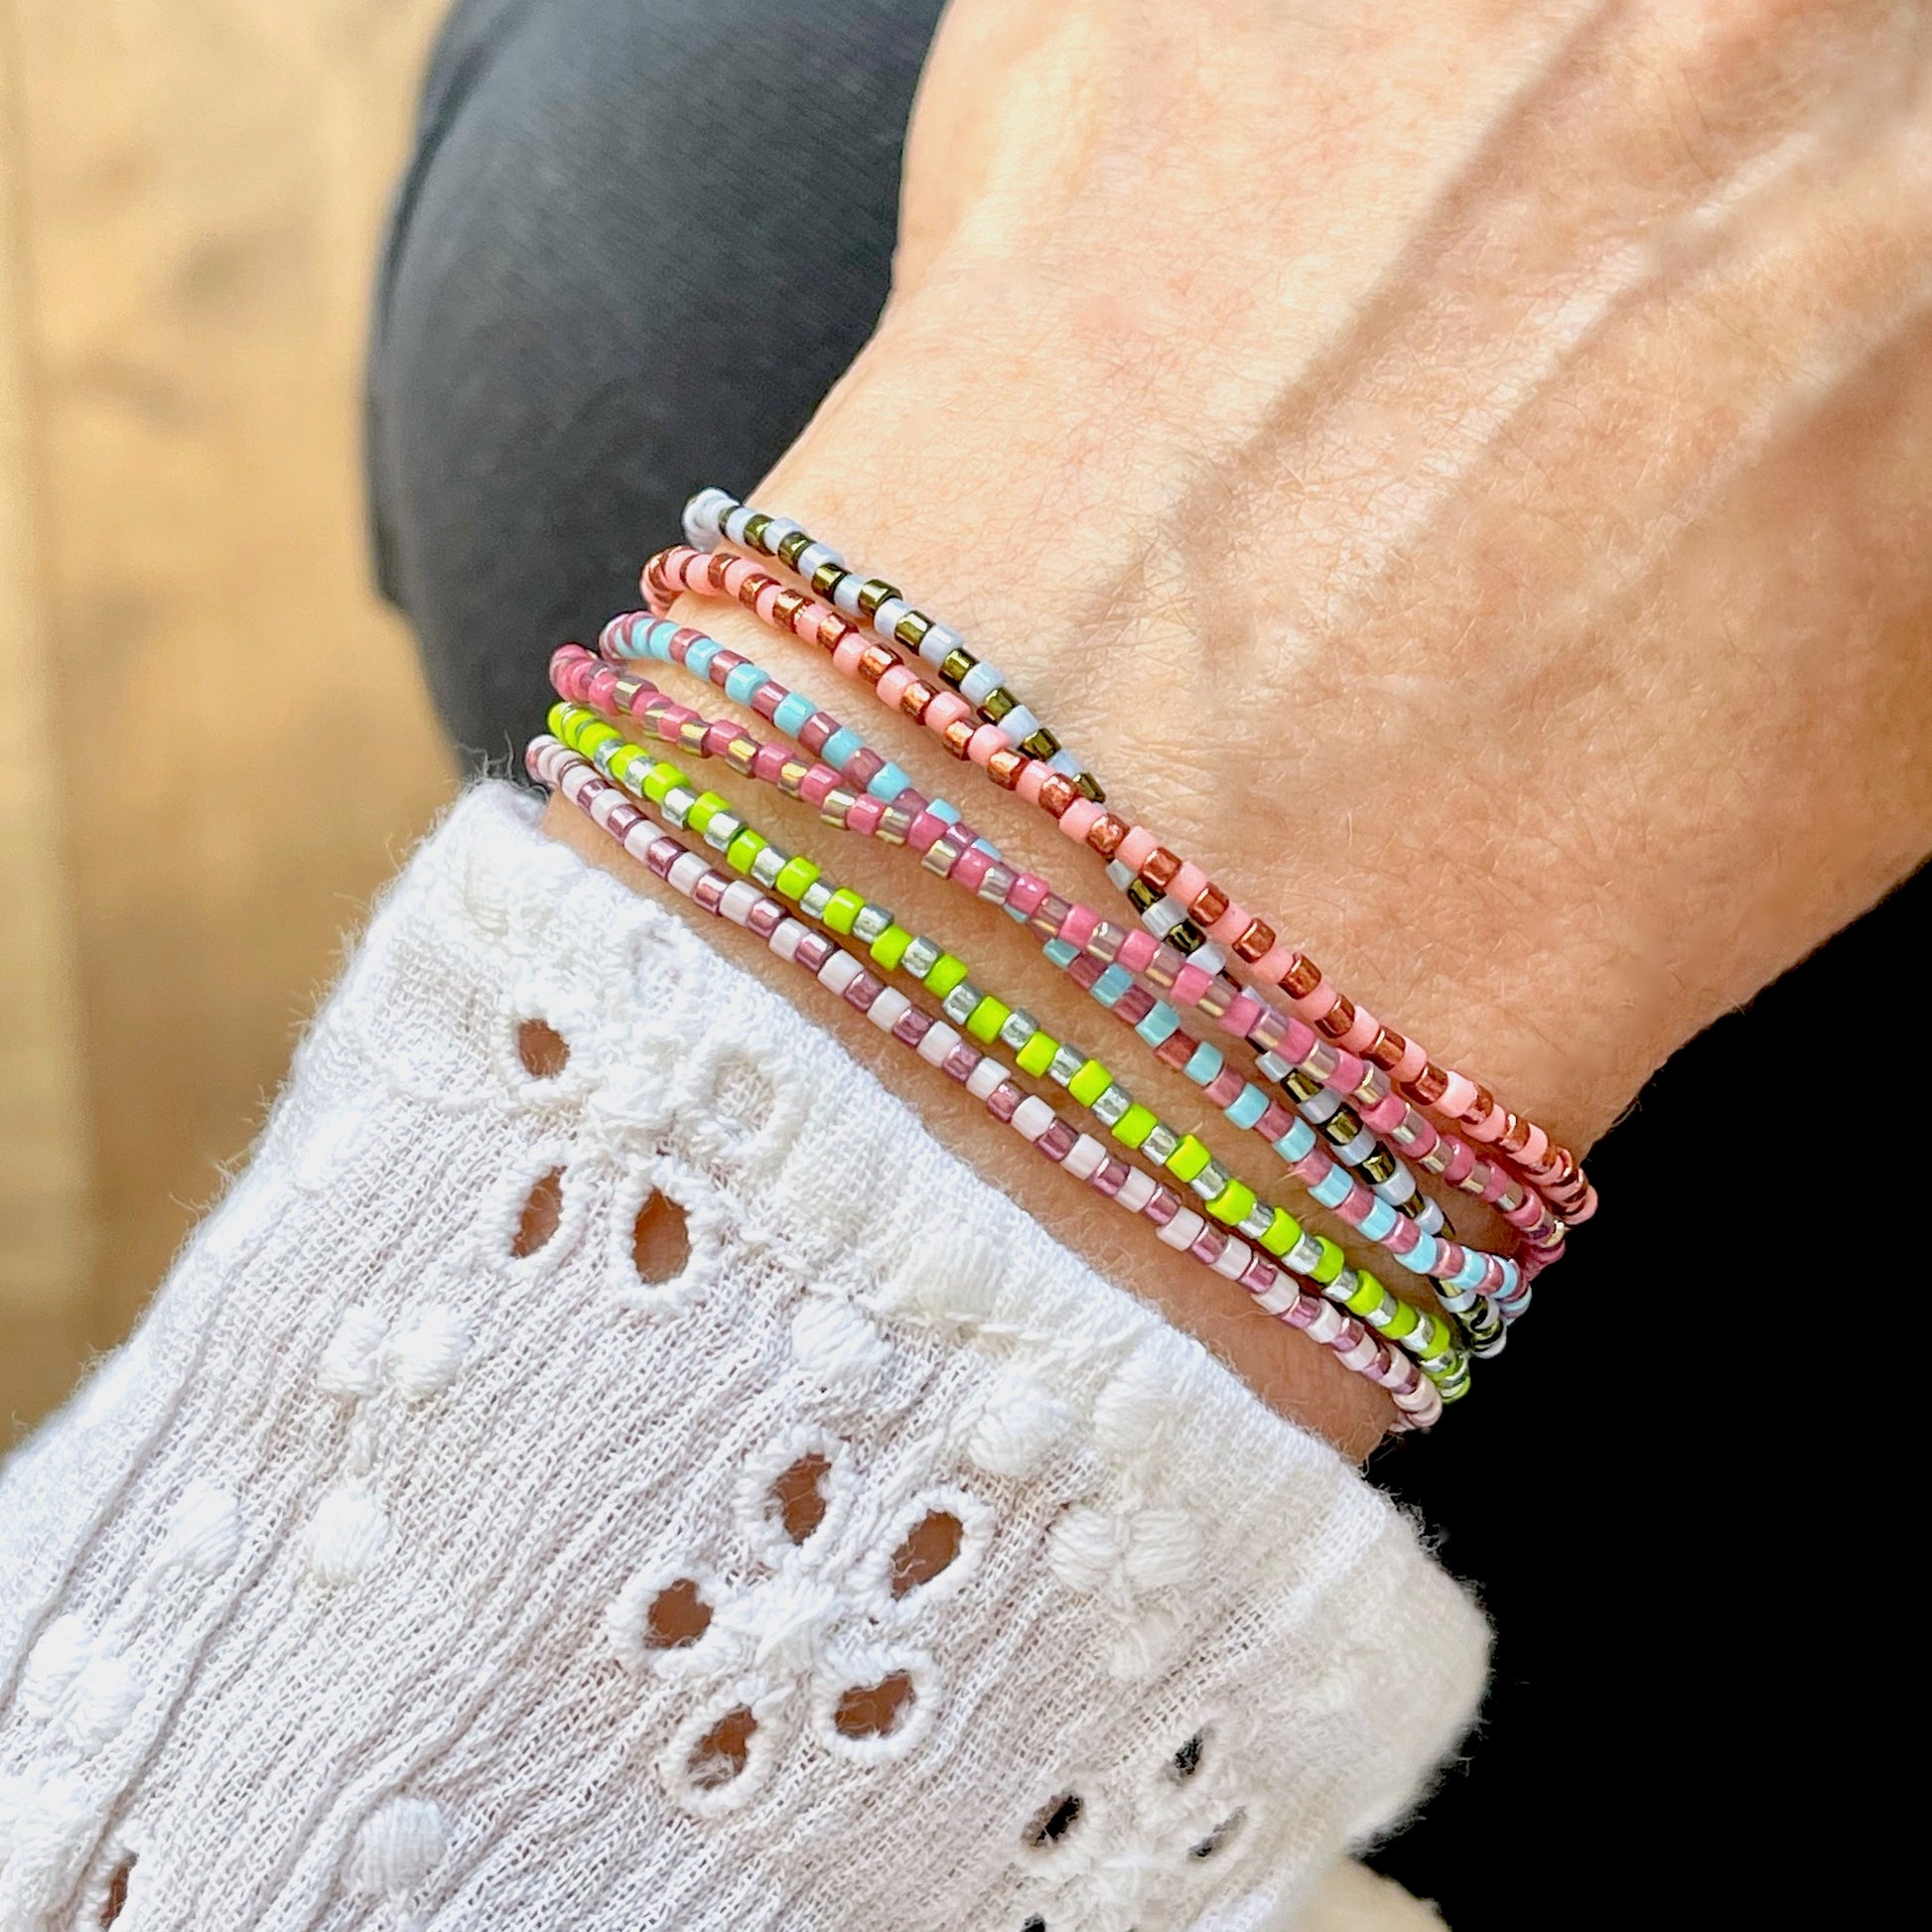 Beaded wrap with dainty citrus colored and metallic seed beads on a stretch cord that wraps the wrist 6 times.